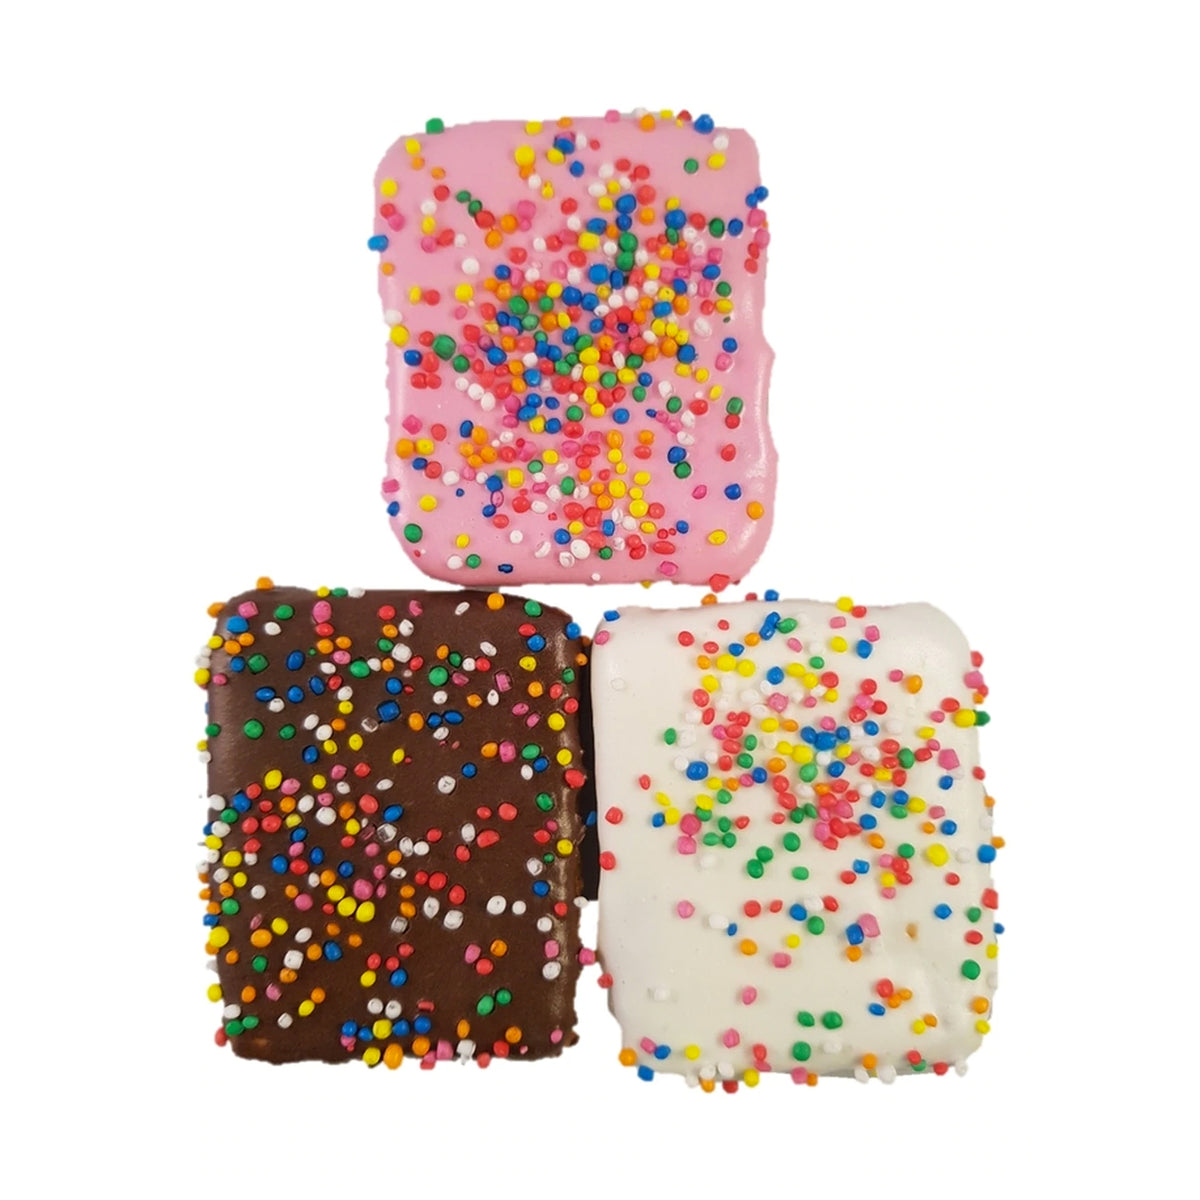 Huds &amp; Toke Fairy Bread Dog Cookie Treats - 4 pieces